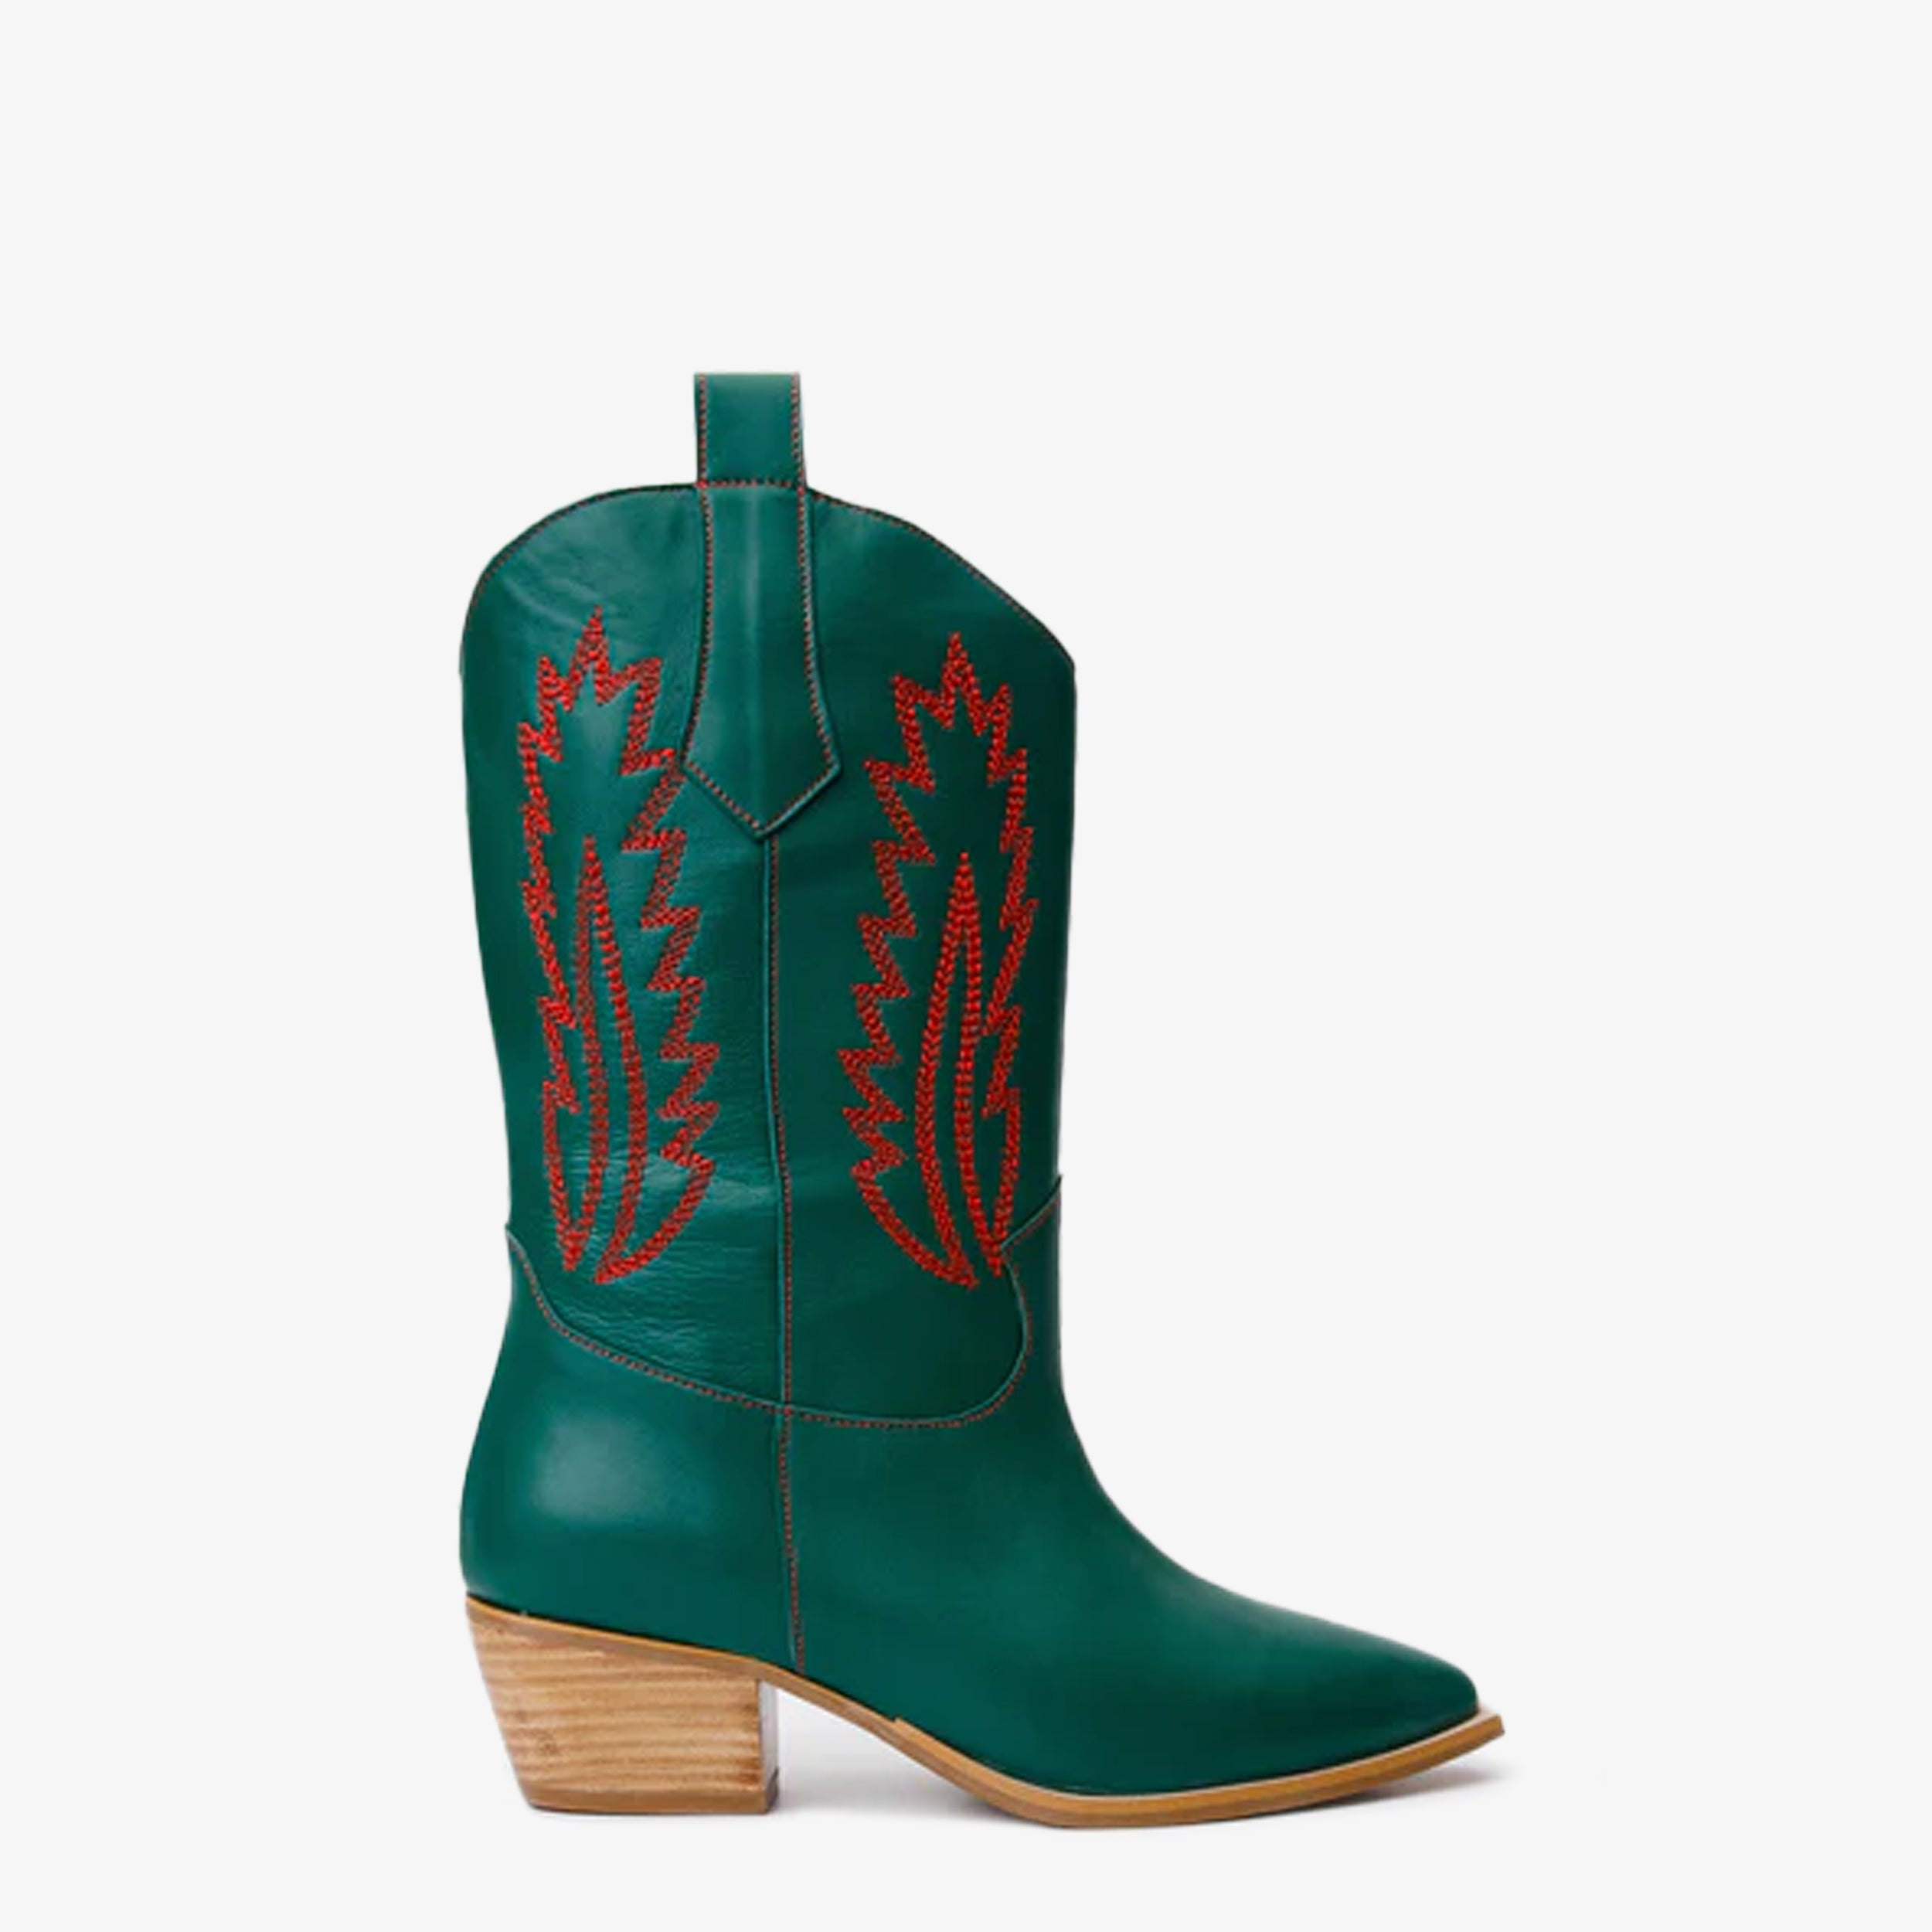 The Togg Green Leather Cowboy Women Boot